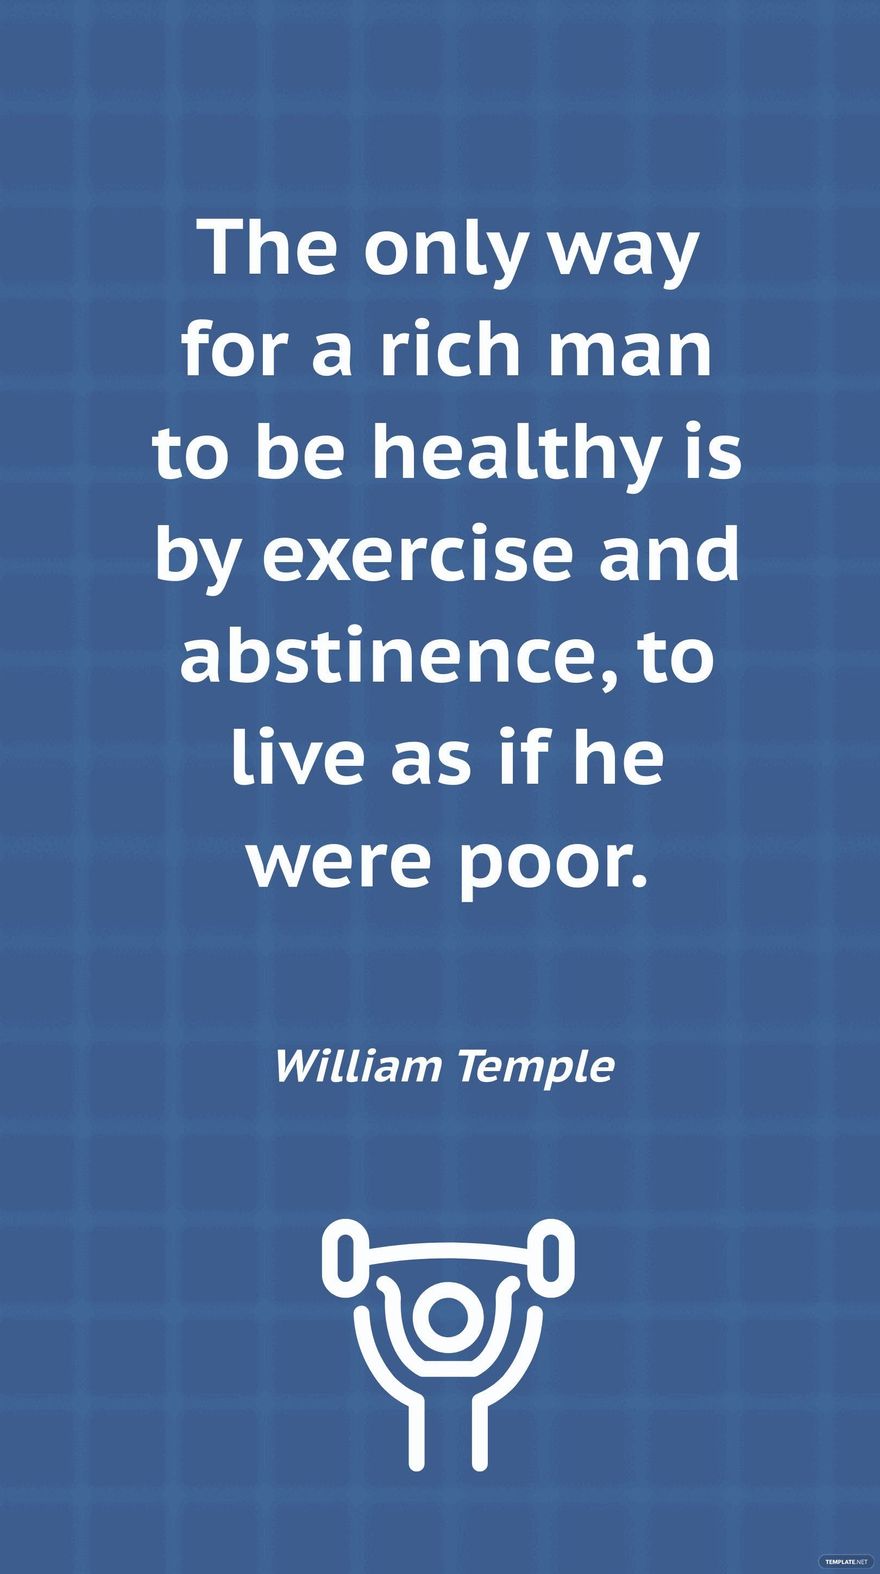 William Temple - The only way for a rich man to be healthy is by exercise and abstinence, to live as if he were poor. in JPG